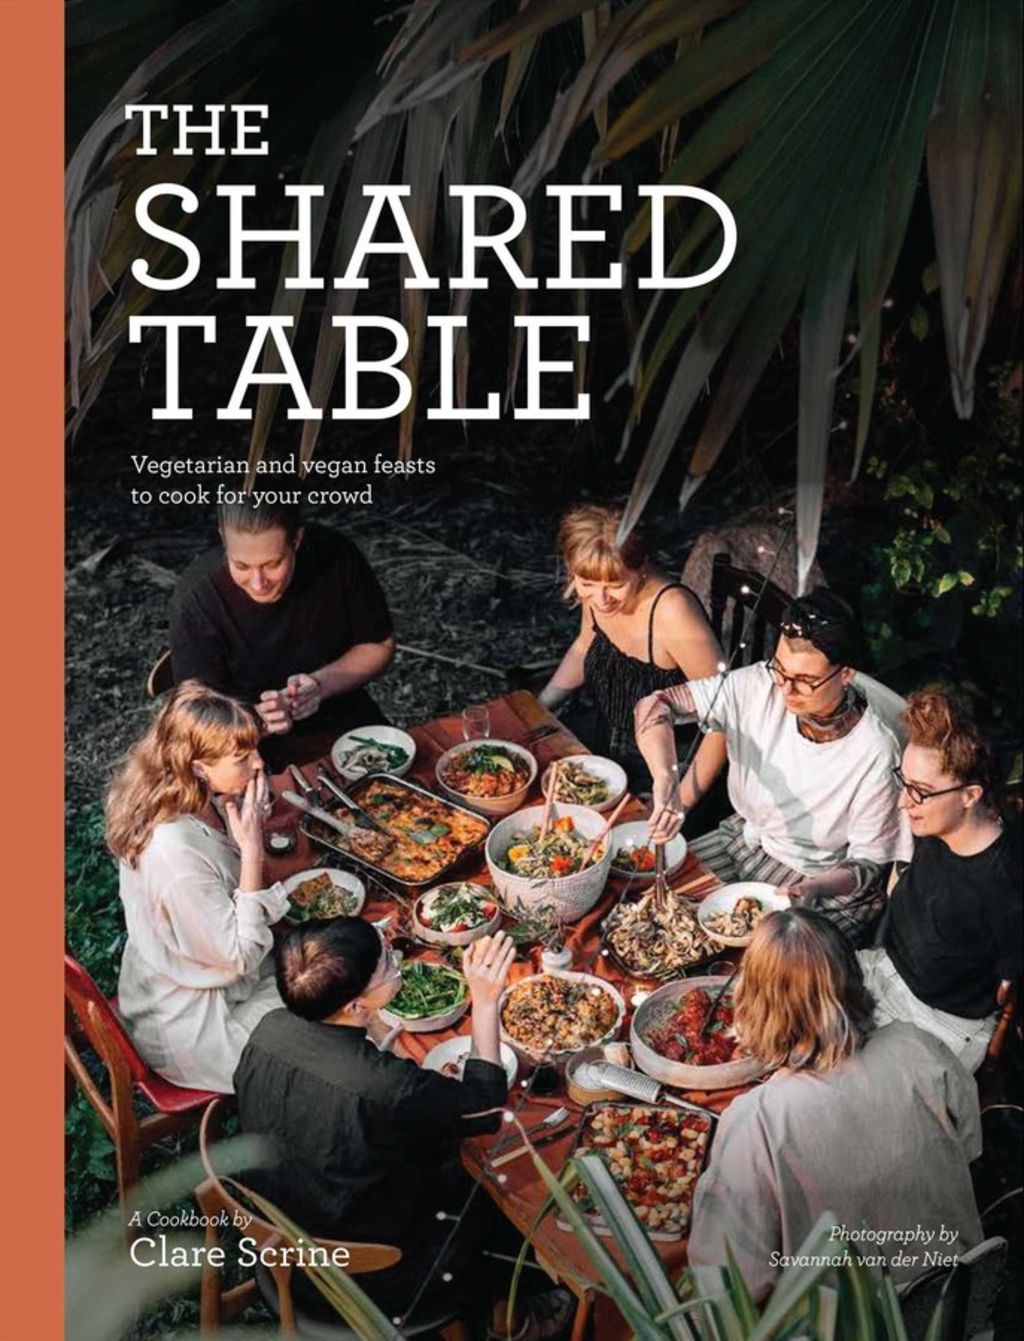 The Shared Table by Clare Scrine Photo: Supplied